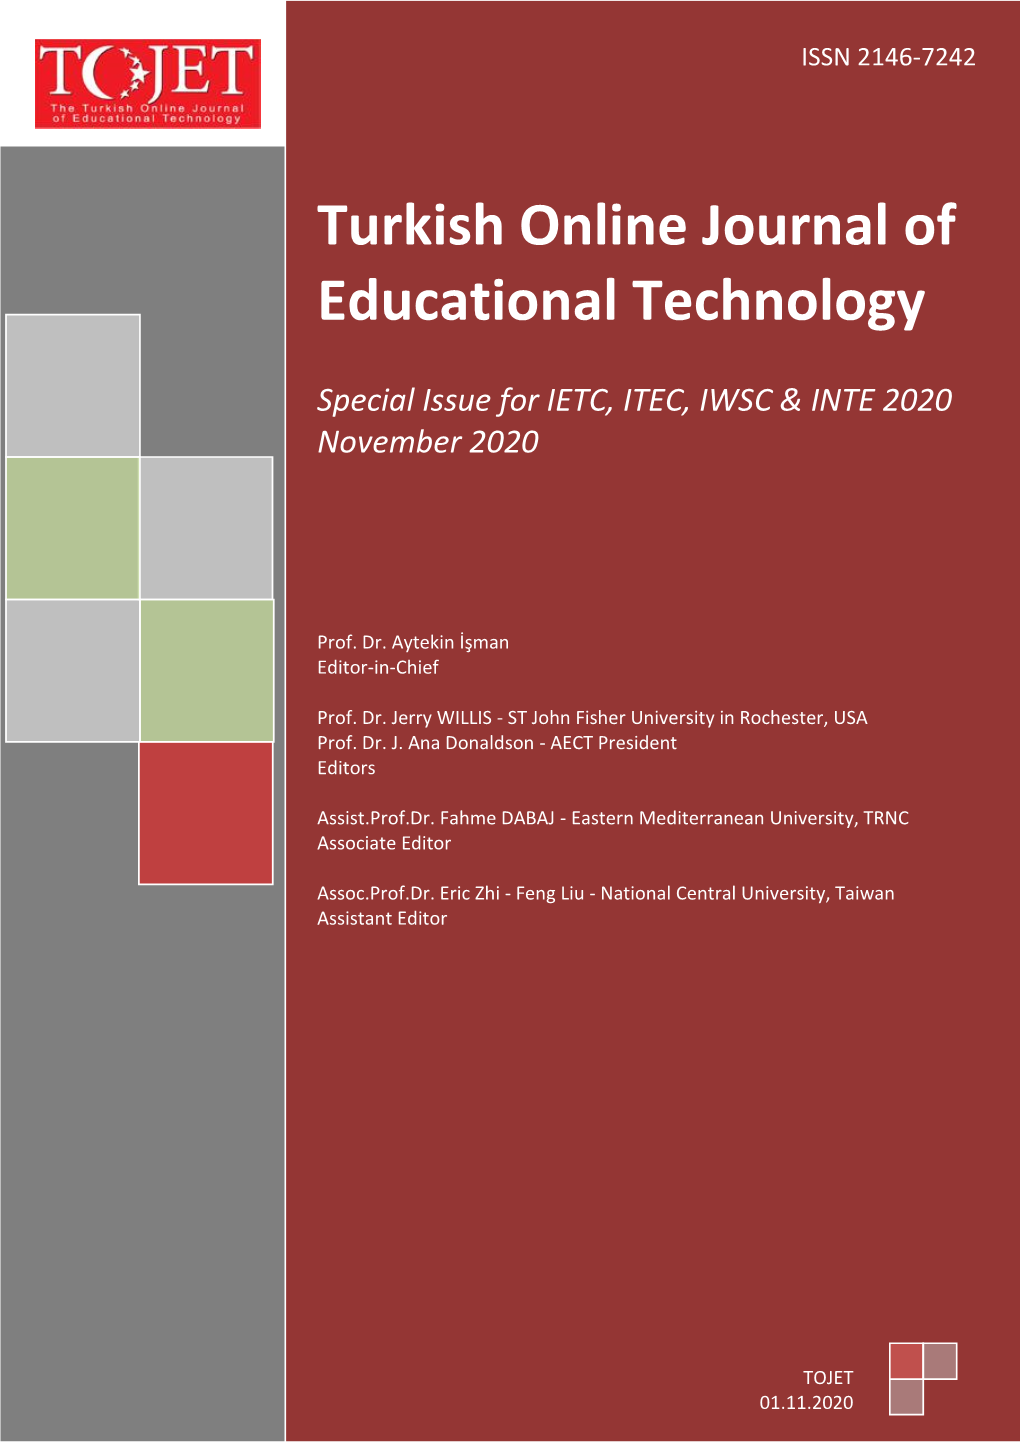 Turkish Online Journal of Educational Technology